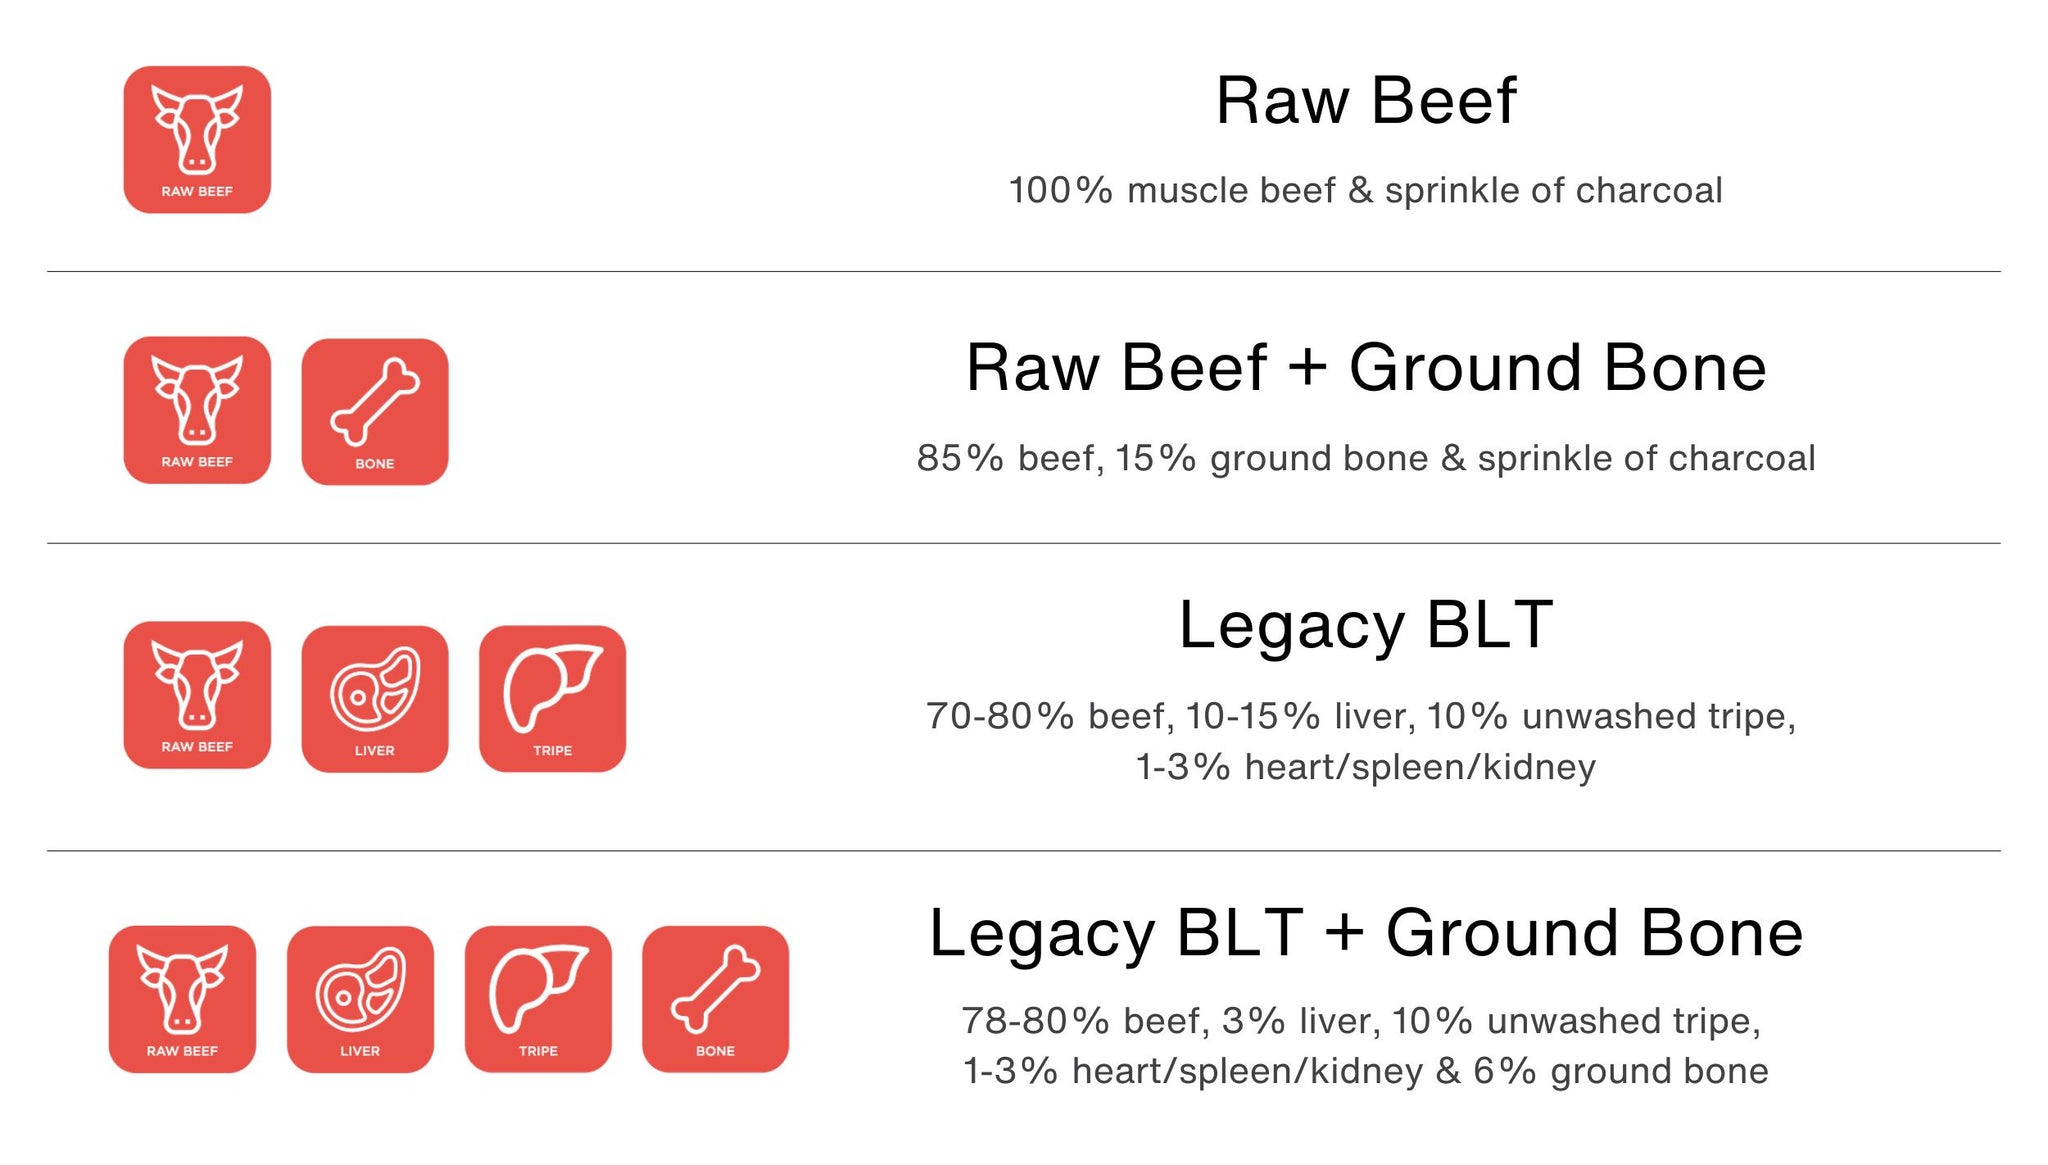 orange cow, liver, tripe and bone icons for midwest legacy beef blends